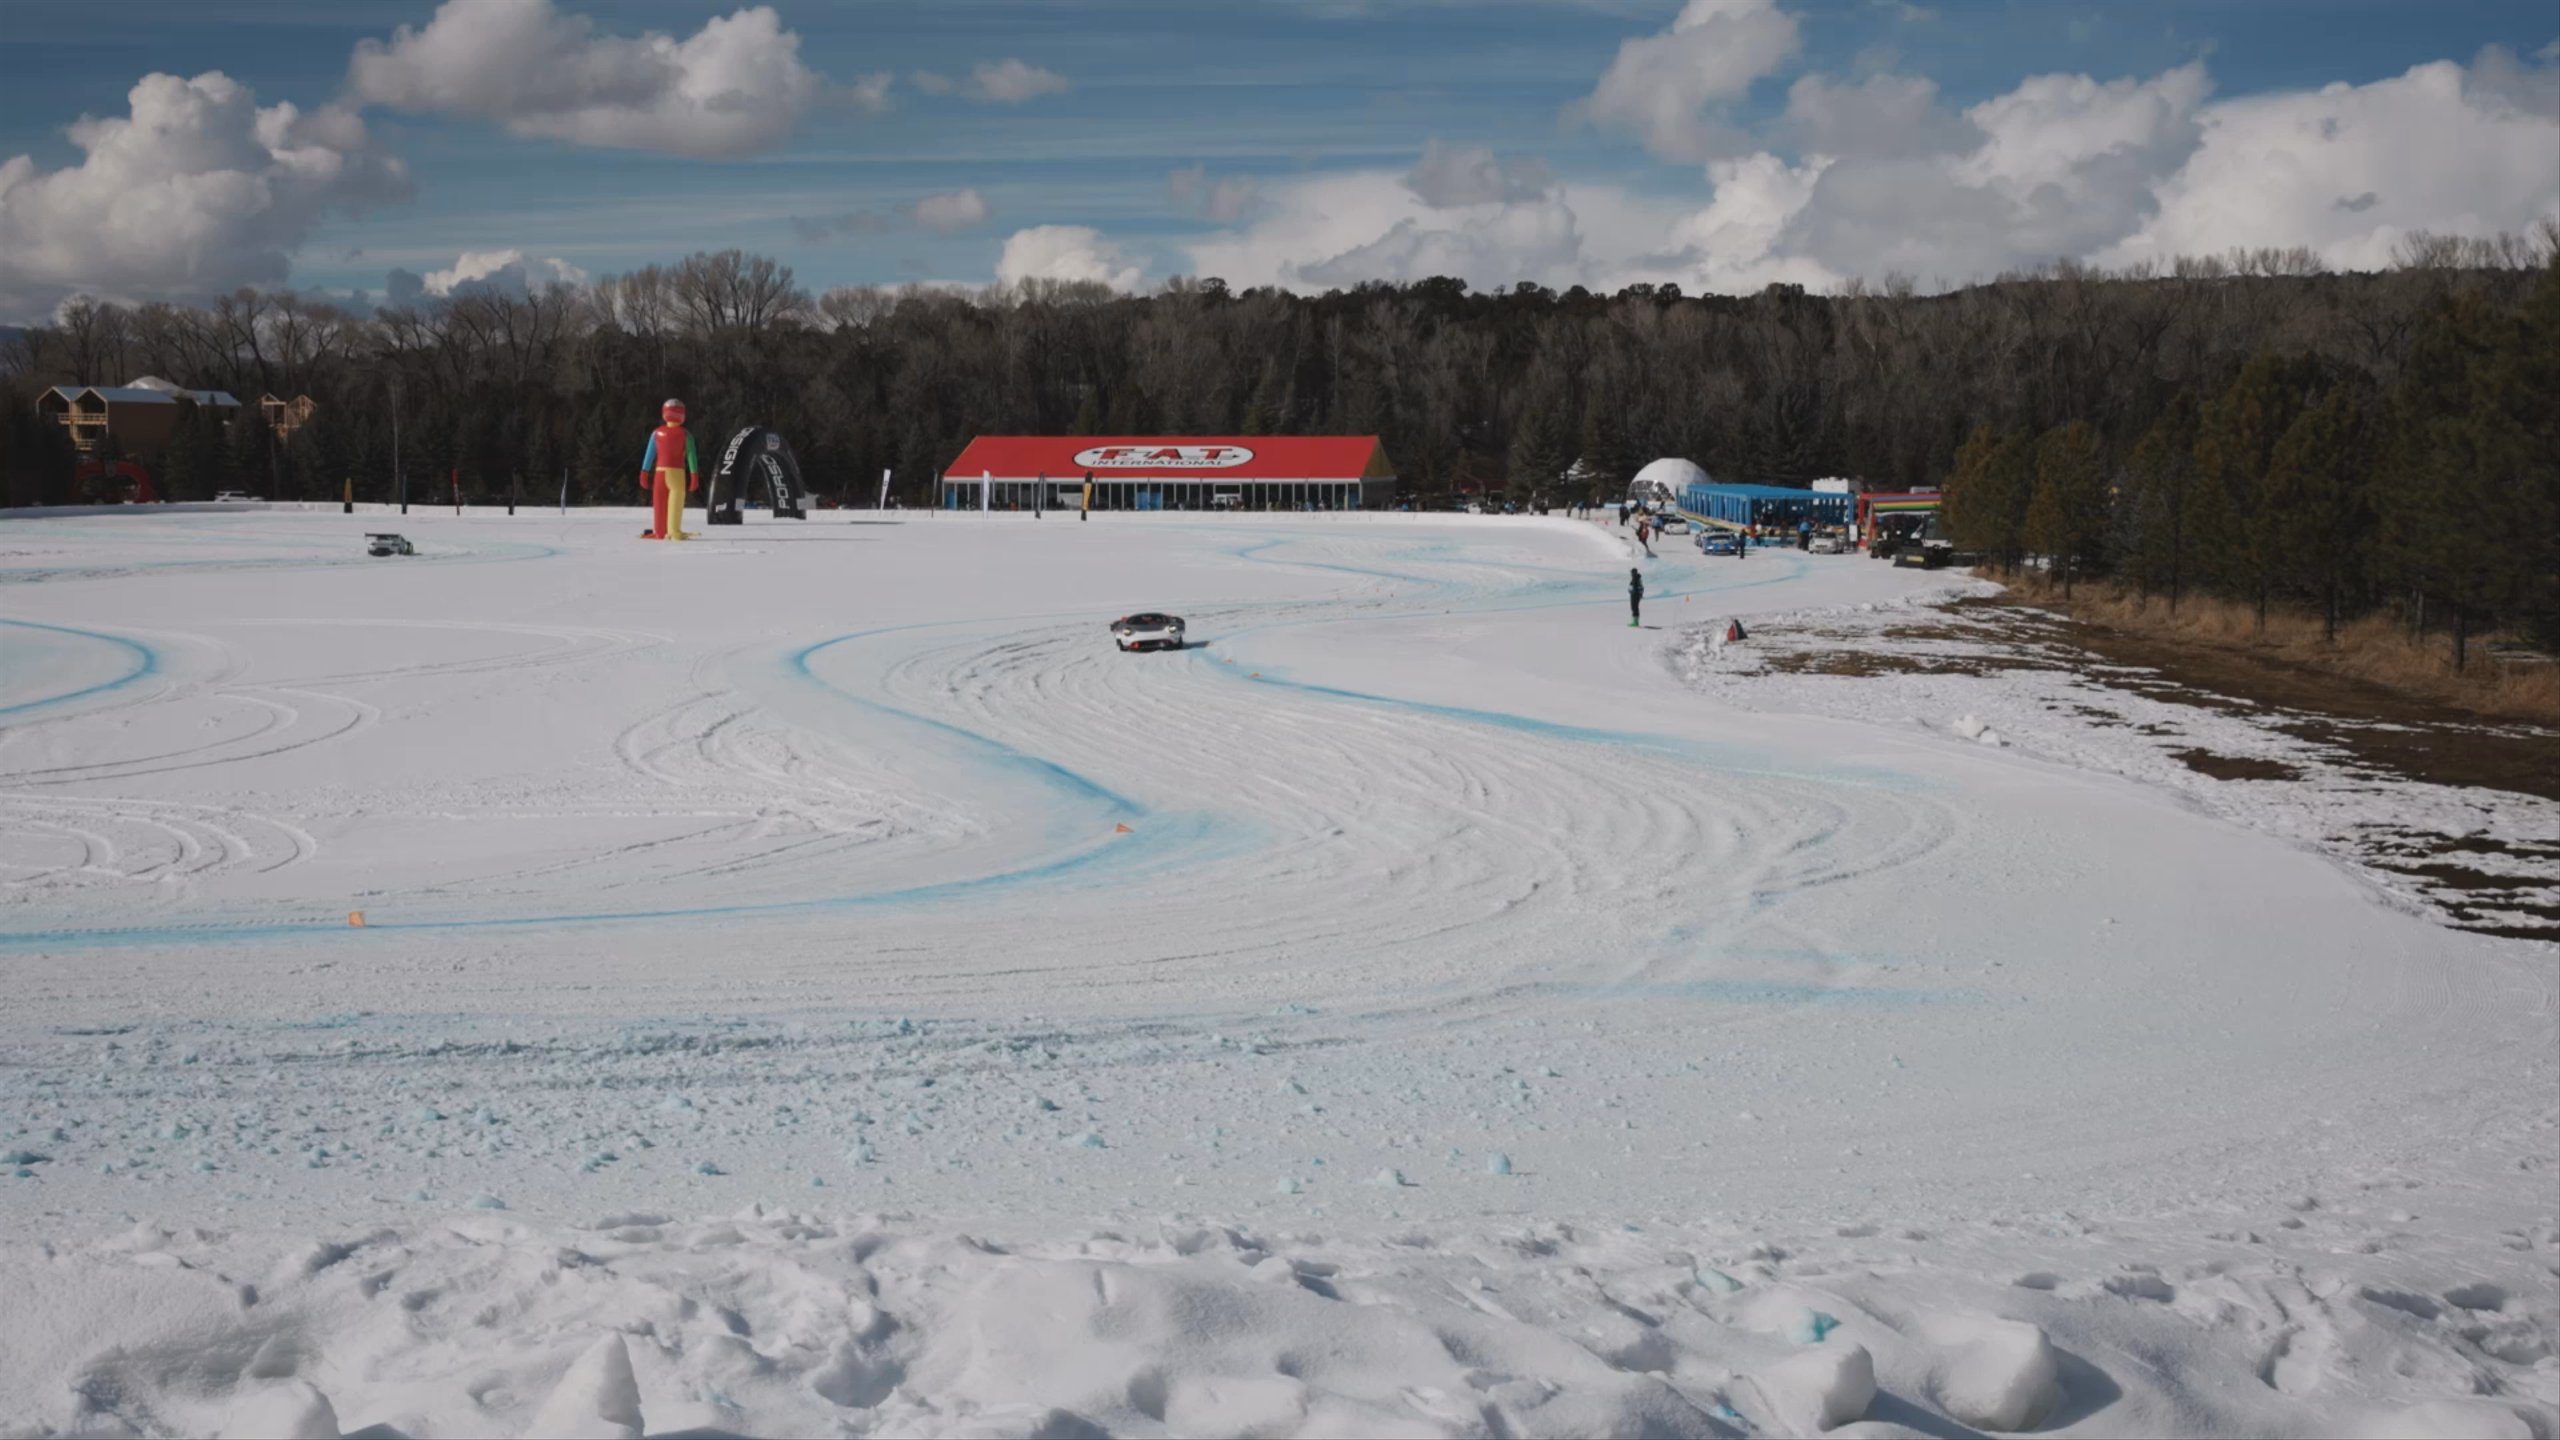 Video of Half11 prototype making a turn on the ice race track